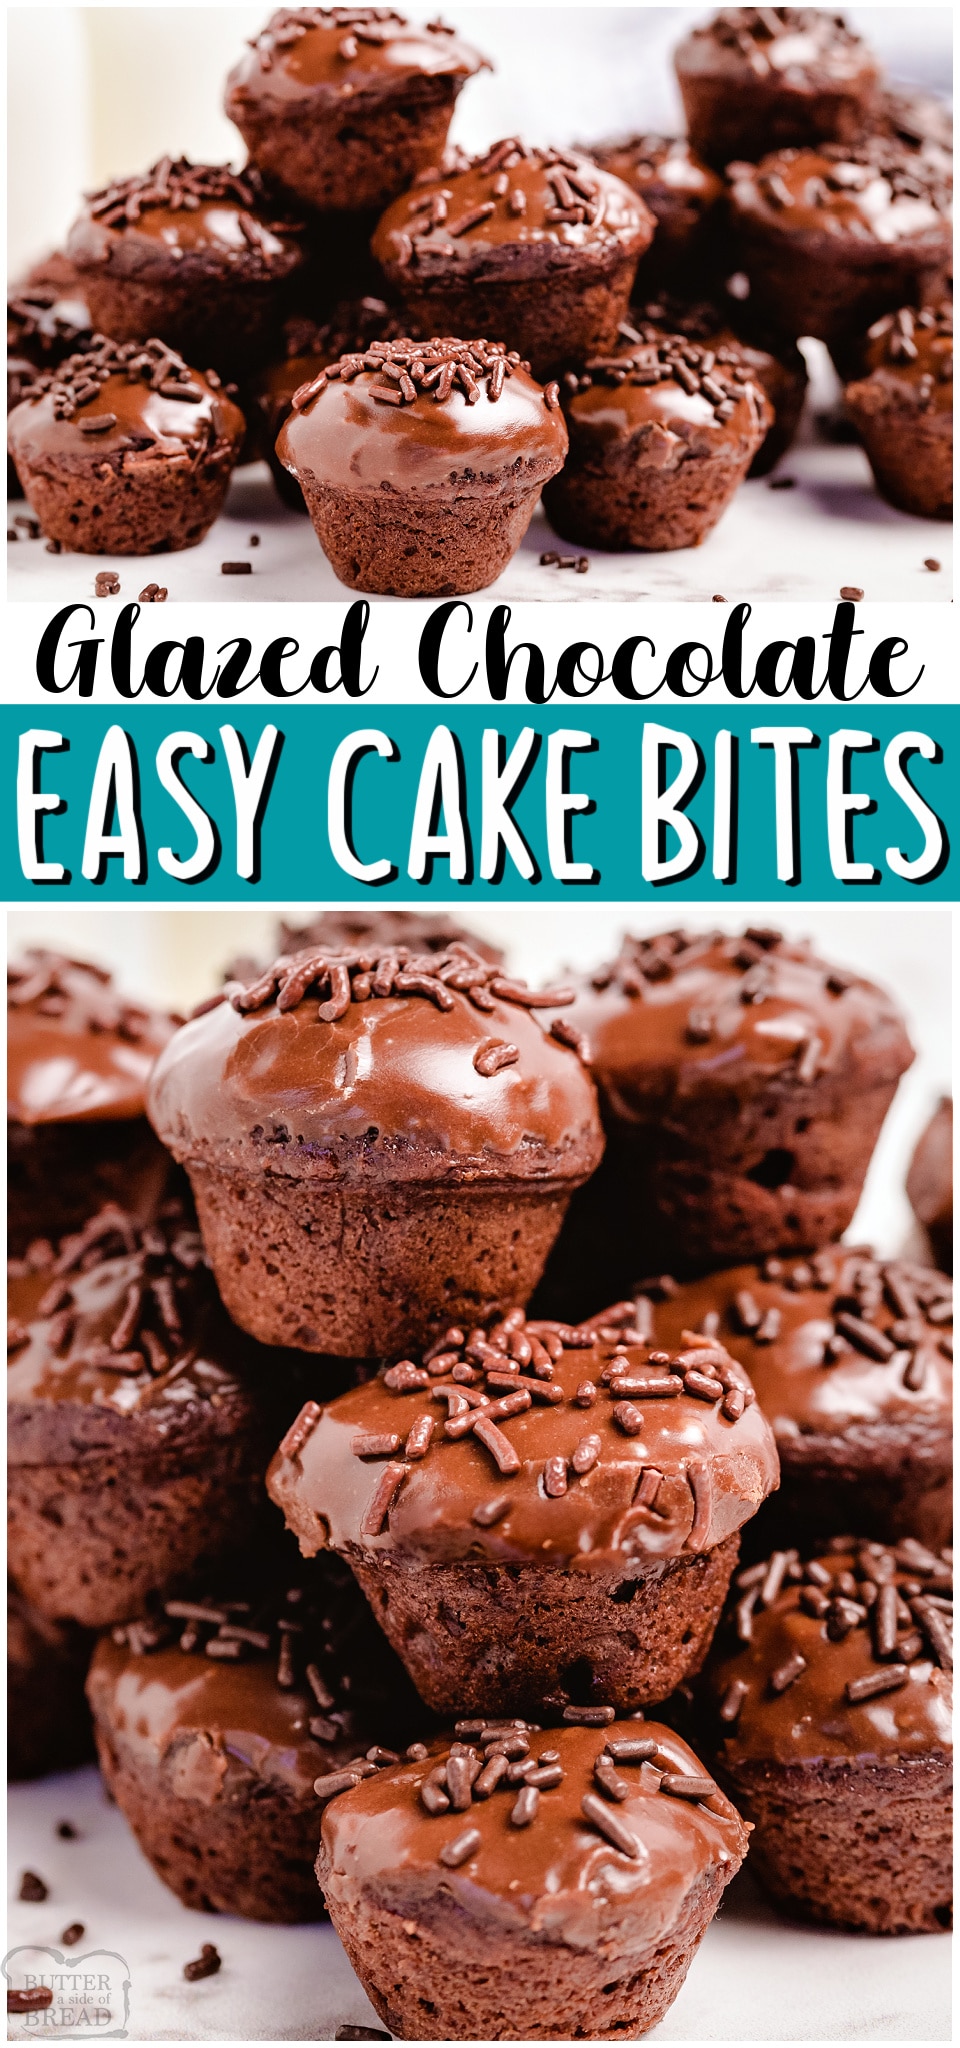 Easy Chocolate Cake Bites are simple, bite-sized chocolate cupcakes that are so easy to make! Super cute & beyond tasty, these mini chocolate cupcakes are always a hit.